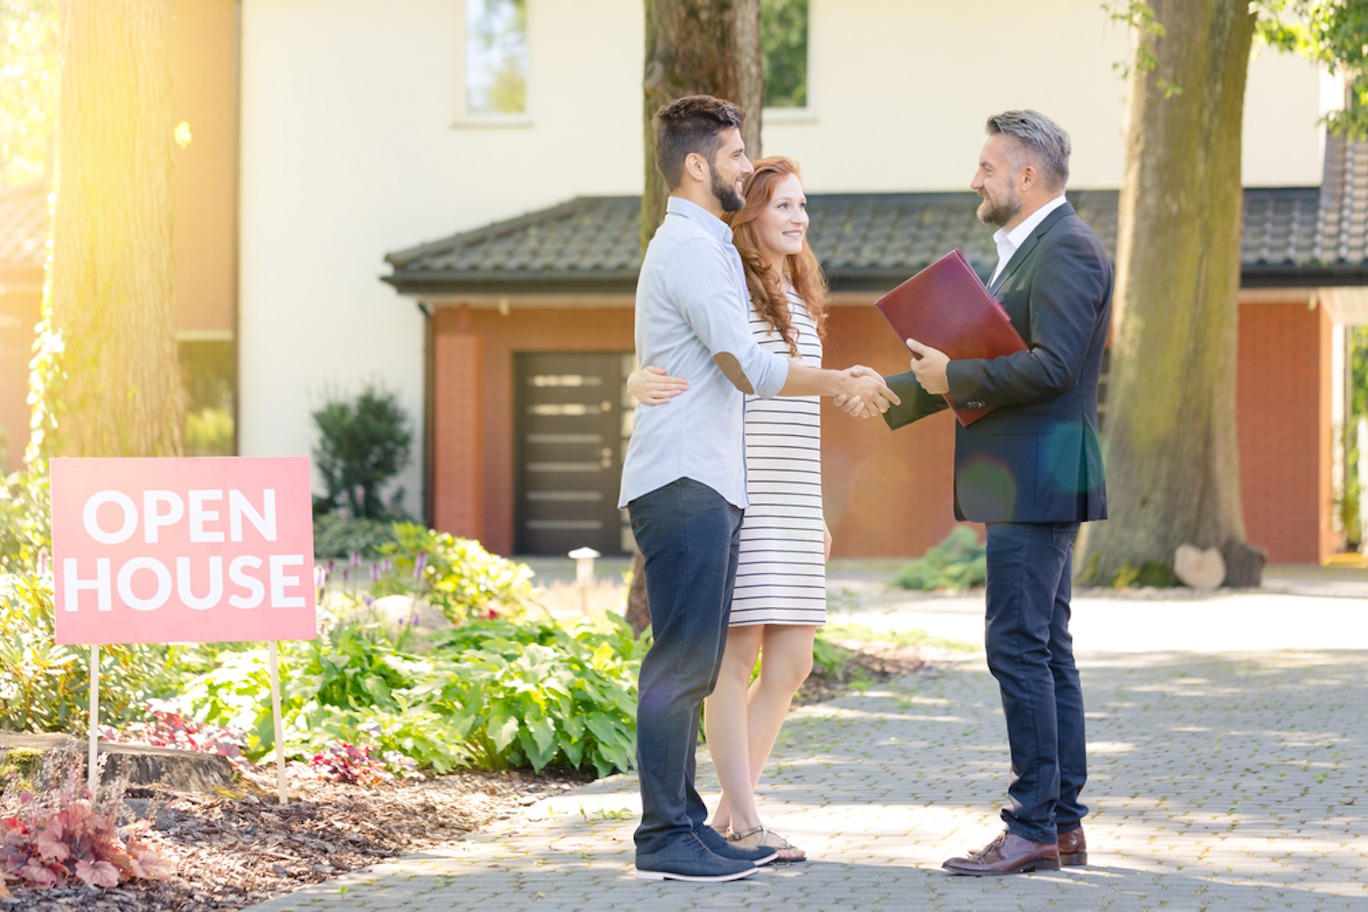 A real estate agent in a dark suit shakes hands with a young couple while standing outside beside an open house sign.